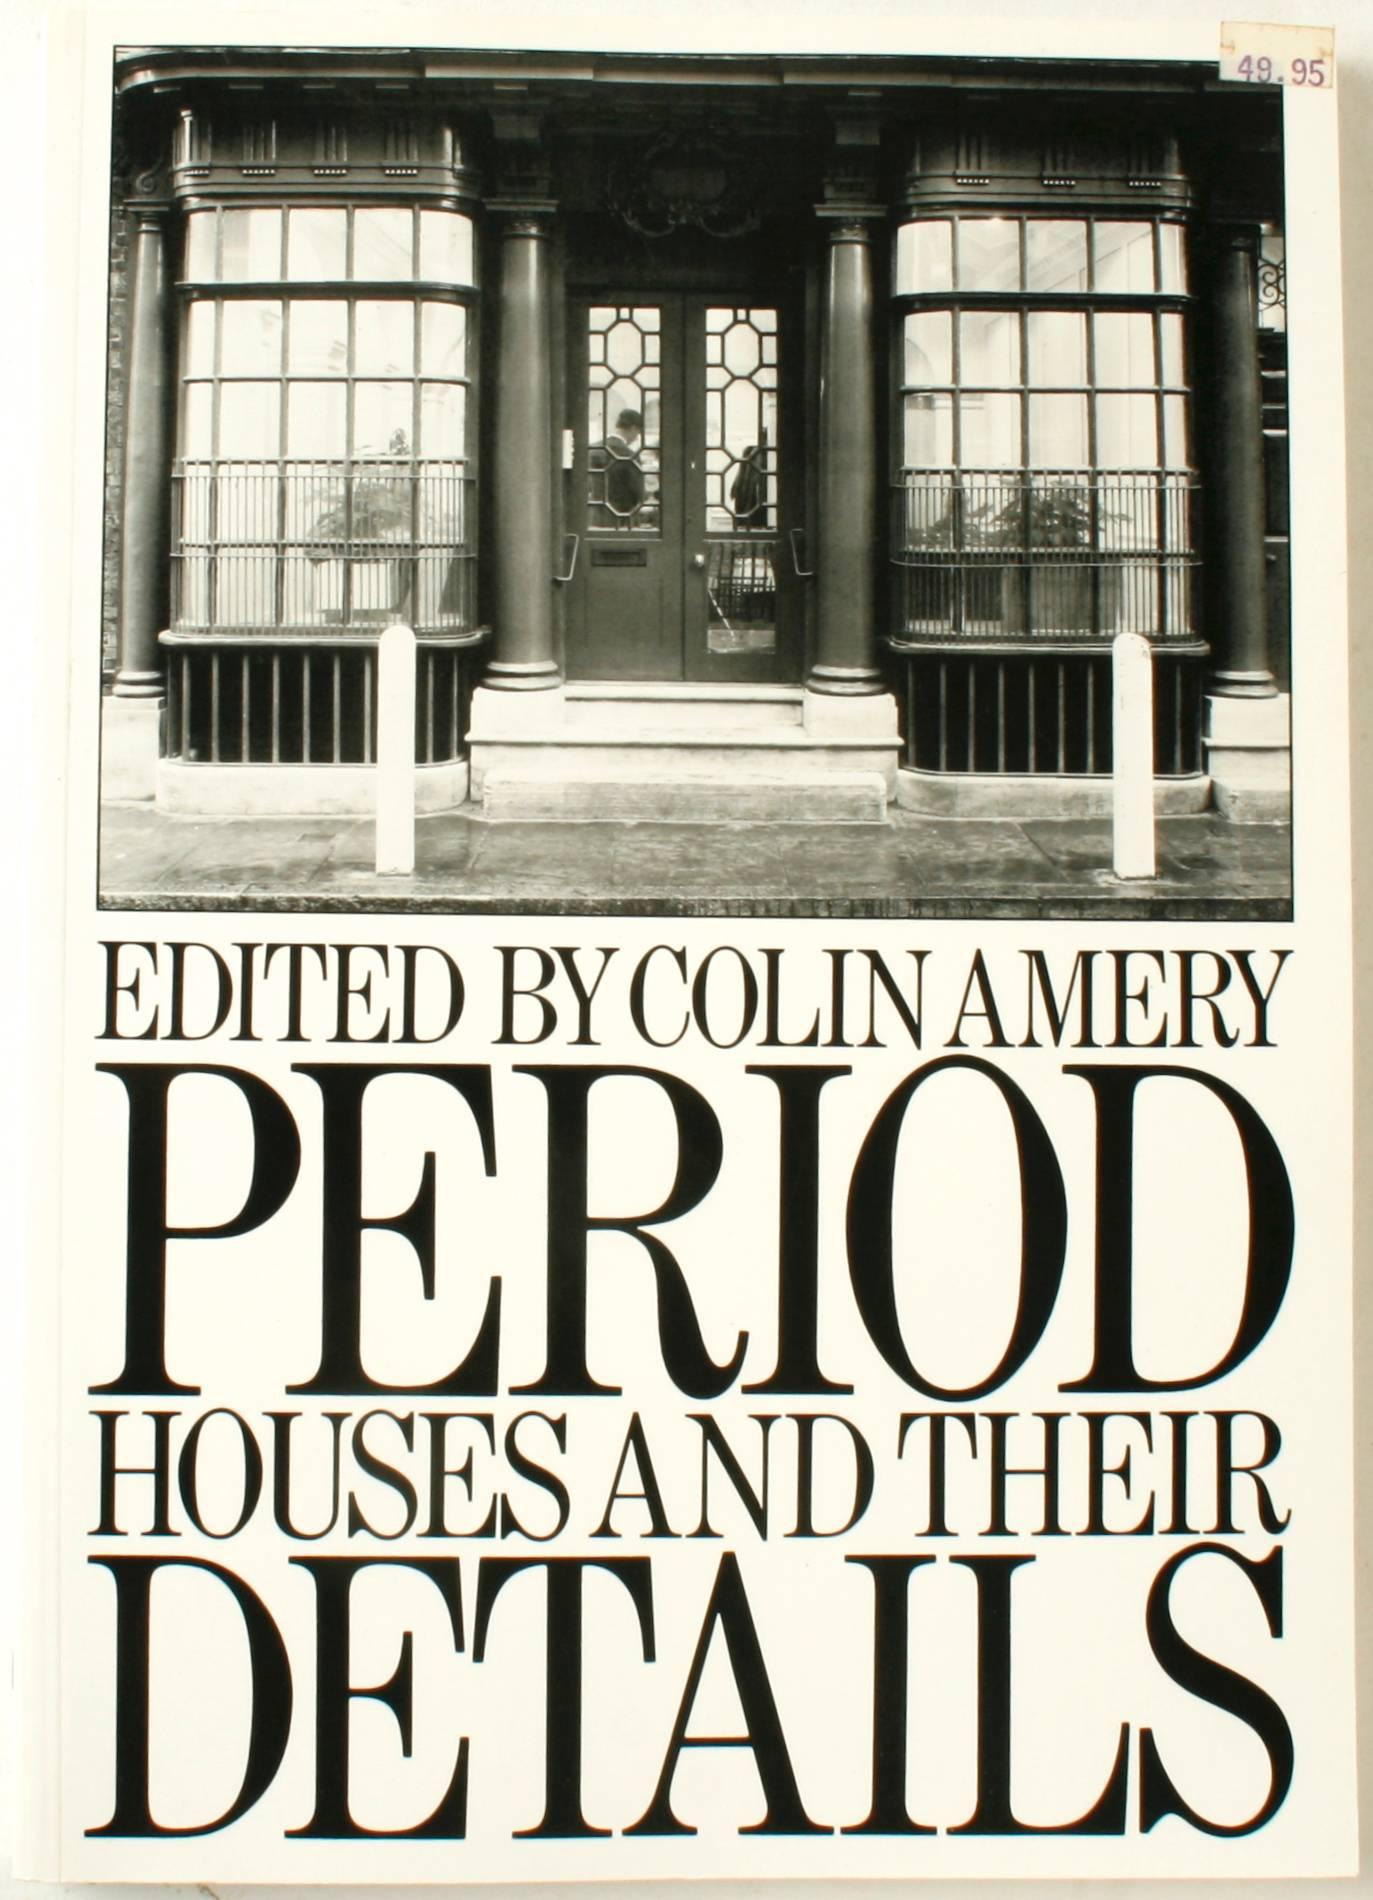 Period houses and their details edited by Colin Amery and Small Georgian, houses and their details 1750-1820 by Stanley C Ramsay and JDM Harvey. London: Butterworth Architecture, 1988. Paperback editions. 212 pp. and 225 pp. Two volumns on period